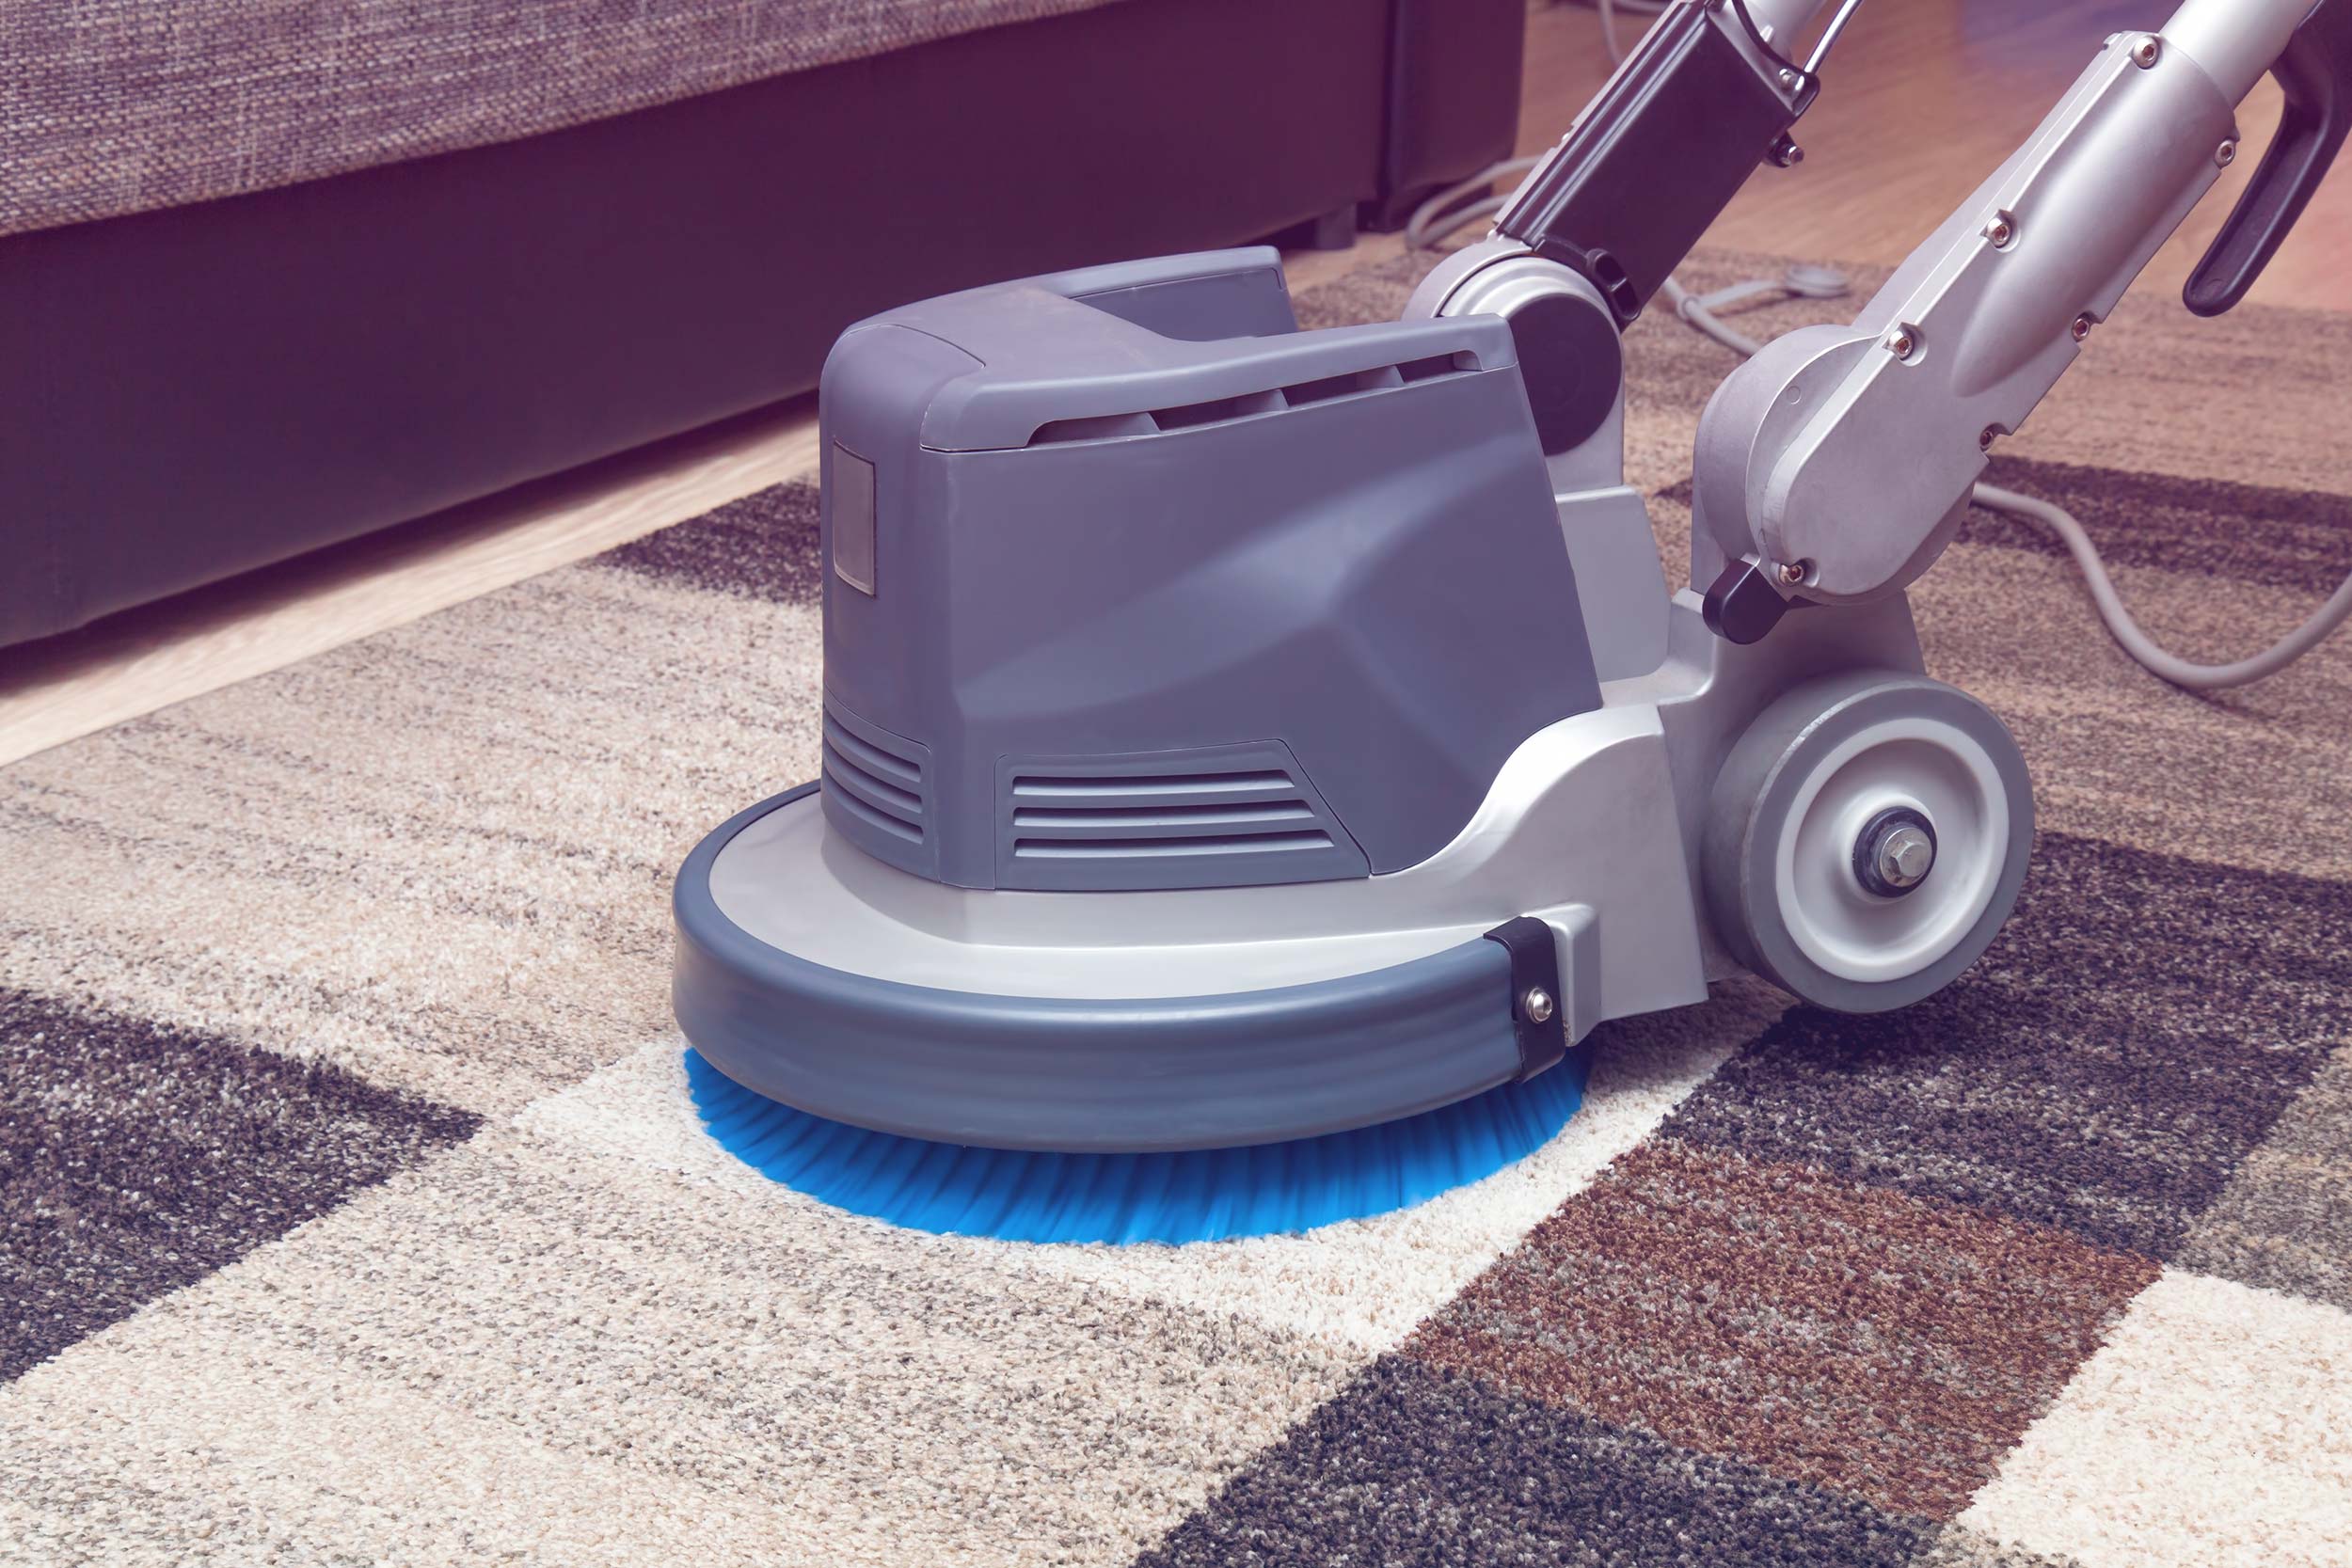 7 Best Carpet Cleaners You Can Buy Online in 2021 - Top-Reviewed Carpet  Cleaners